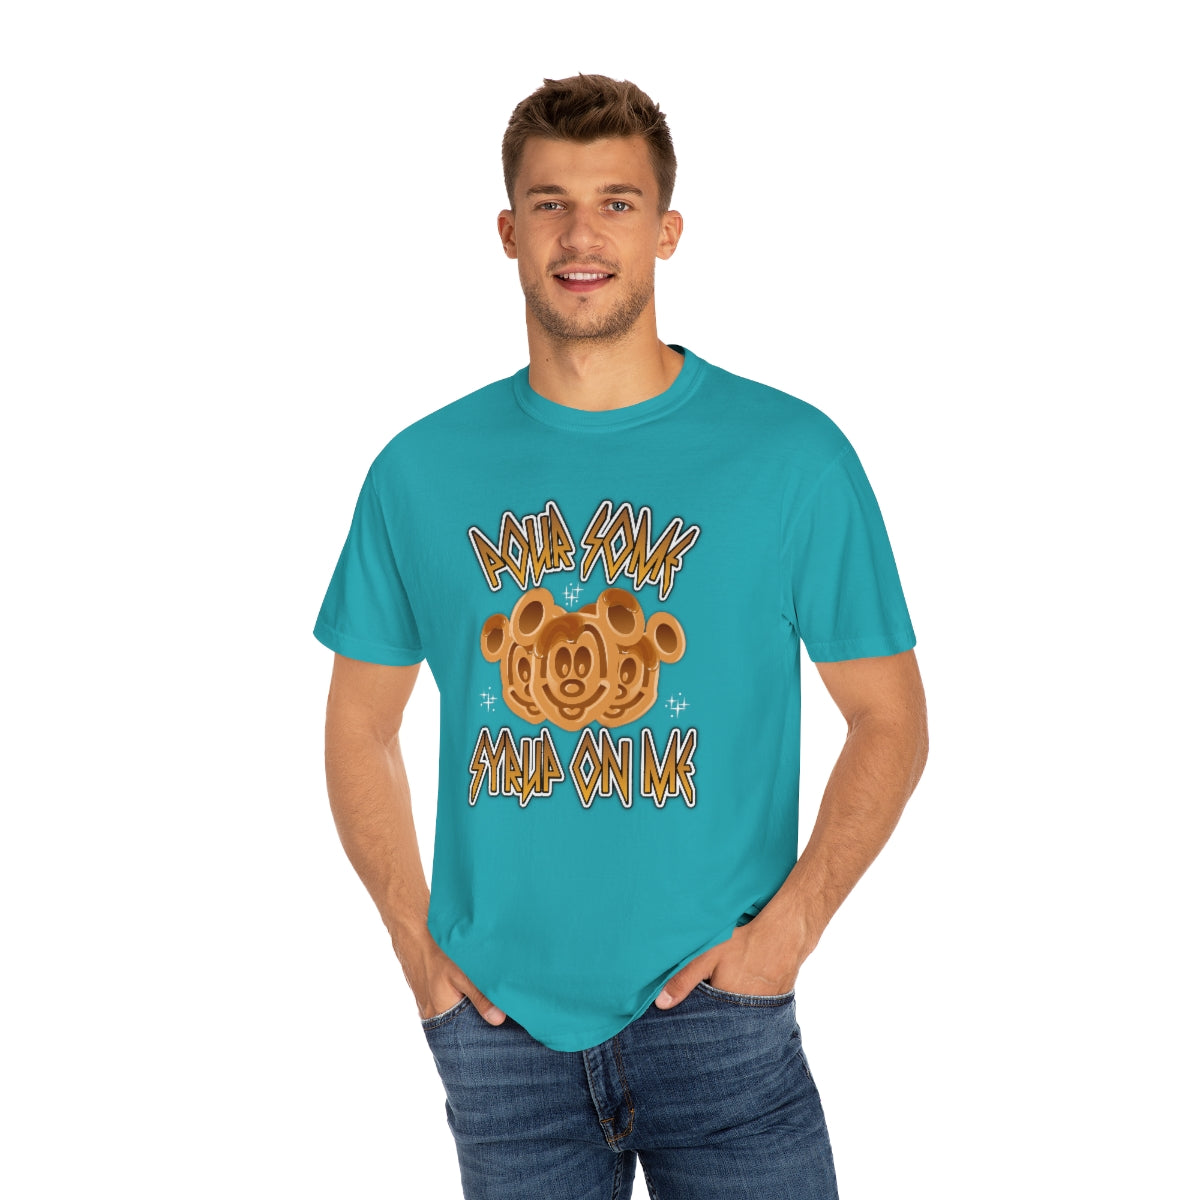 Waffles And Syrup Adult Unisex Tee